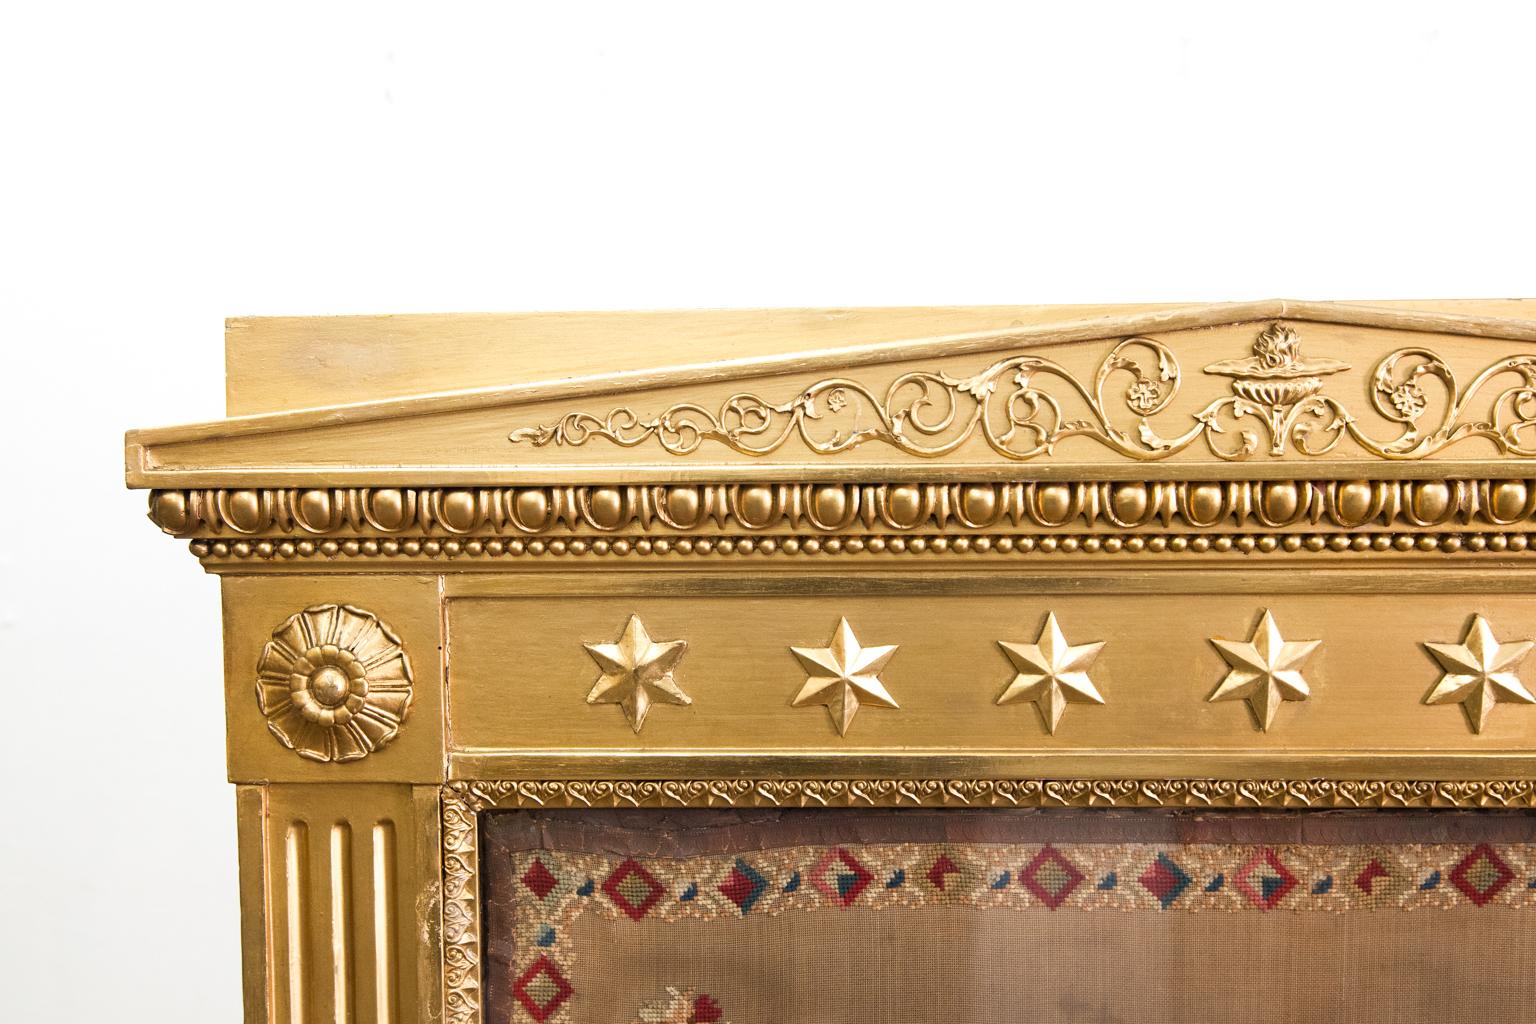 19th century gilt needlework fire screen, the crest having gilt metal urn and flame with trailing arabesques, the frieze with star appliques, reeded stiles with applied rosettes on each corner, floral needlework behind glass, stylized leaves applied